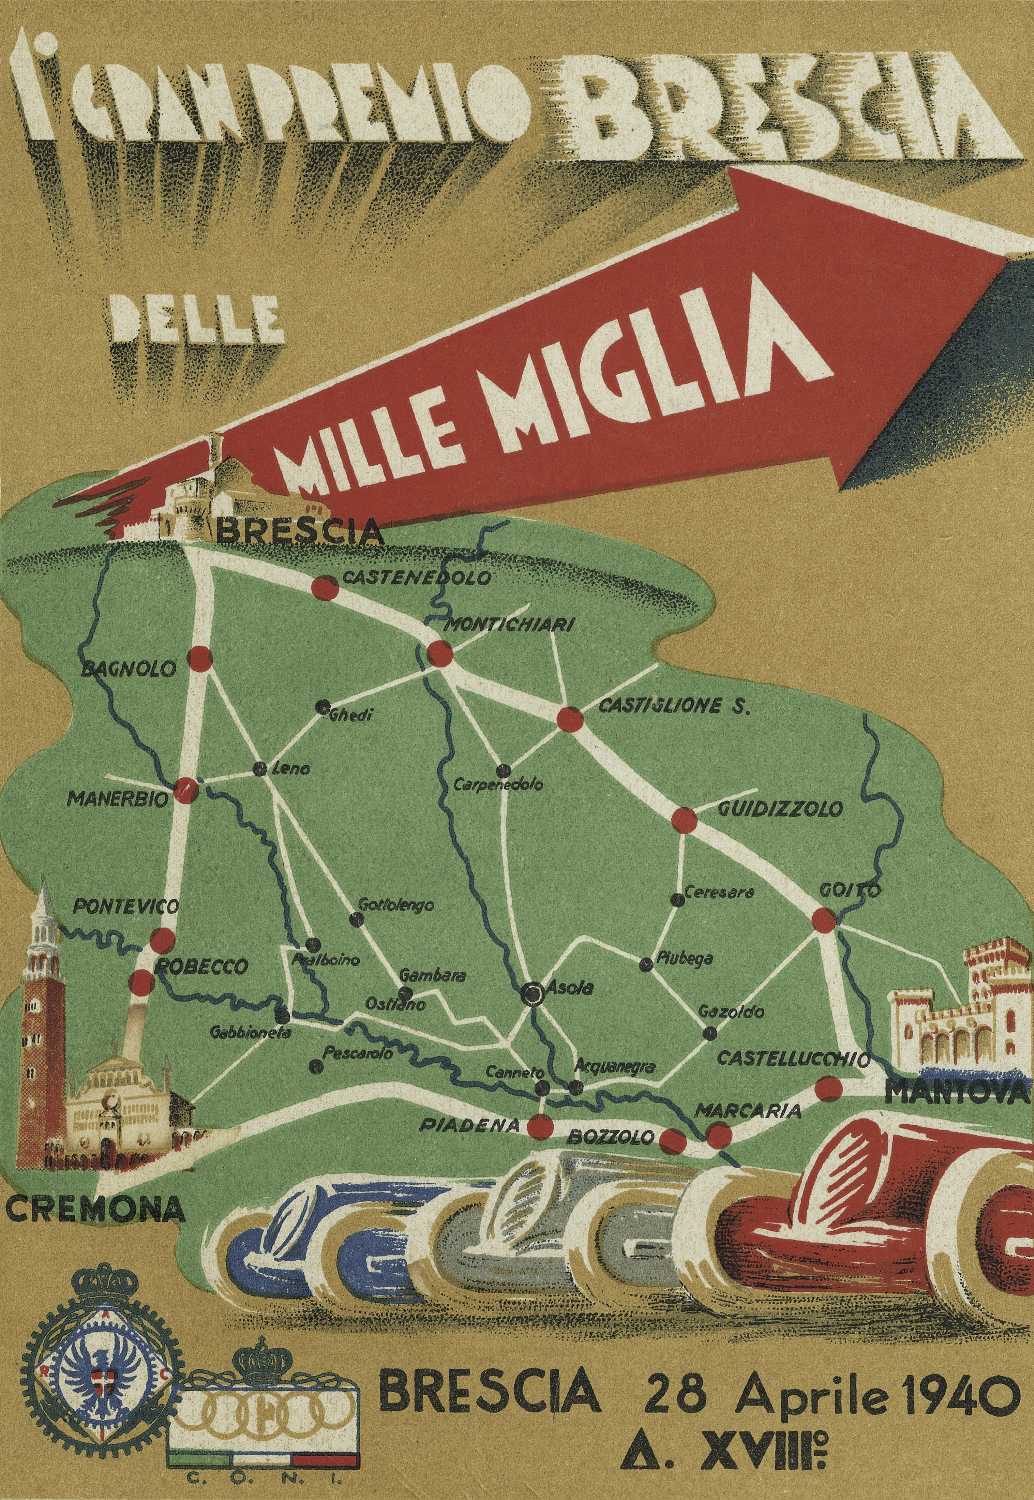 Poster for the 1940 "Mille Miglia" (03/2010)